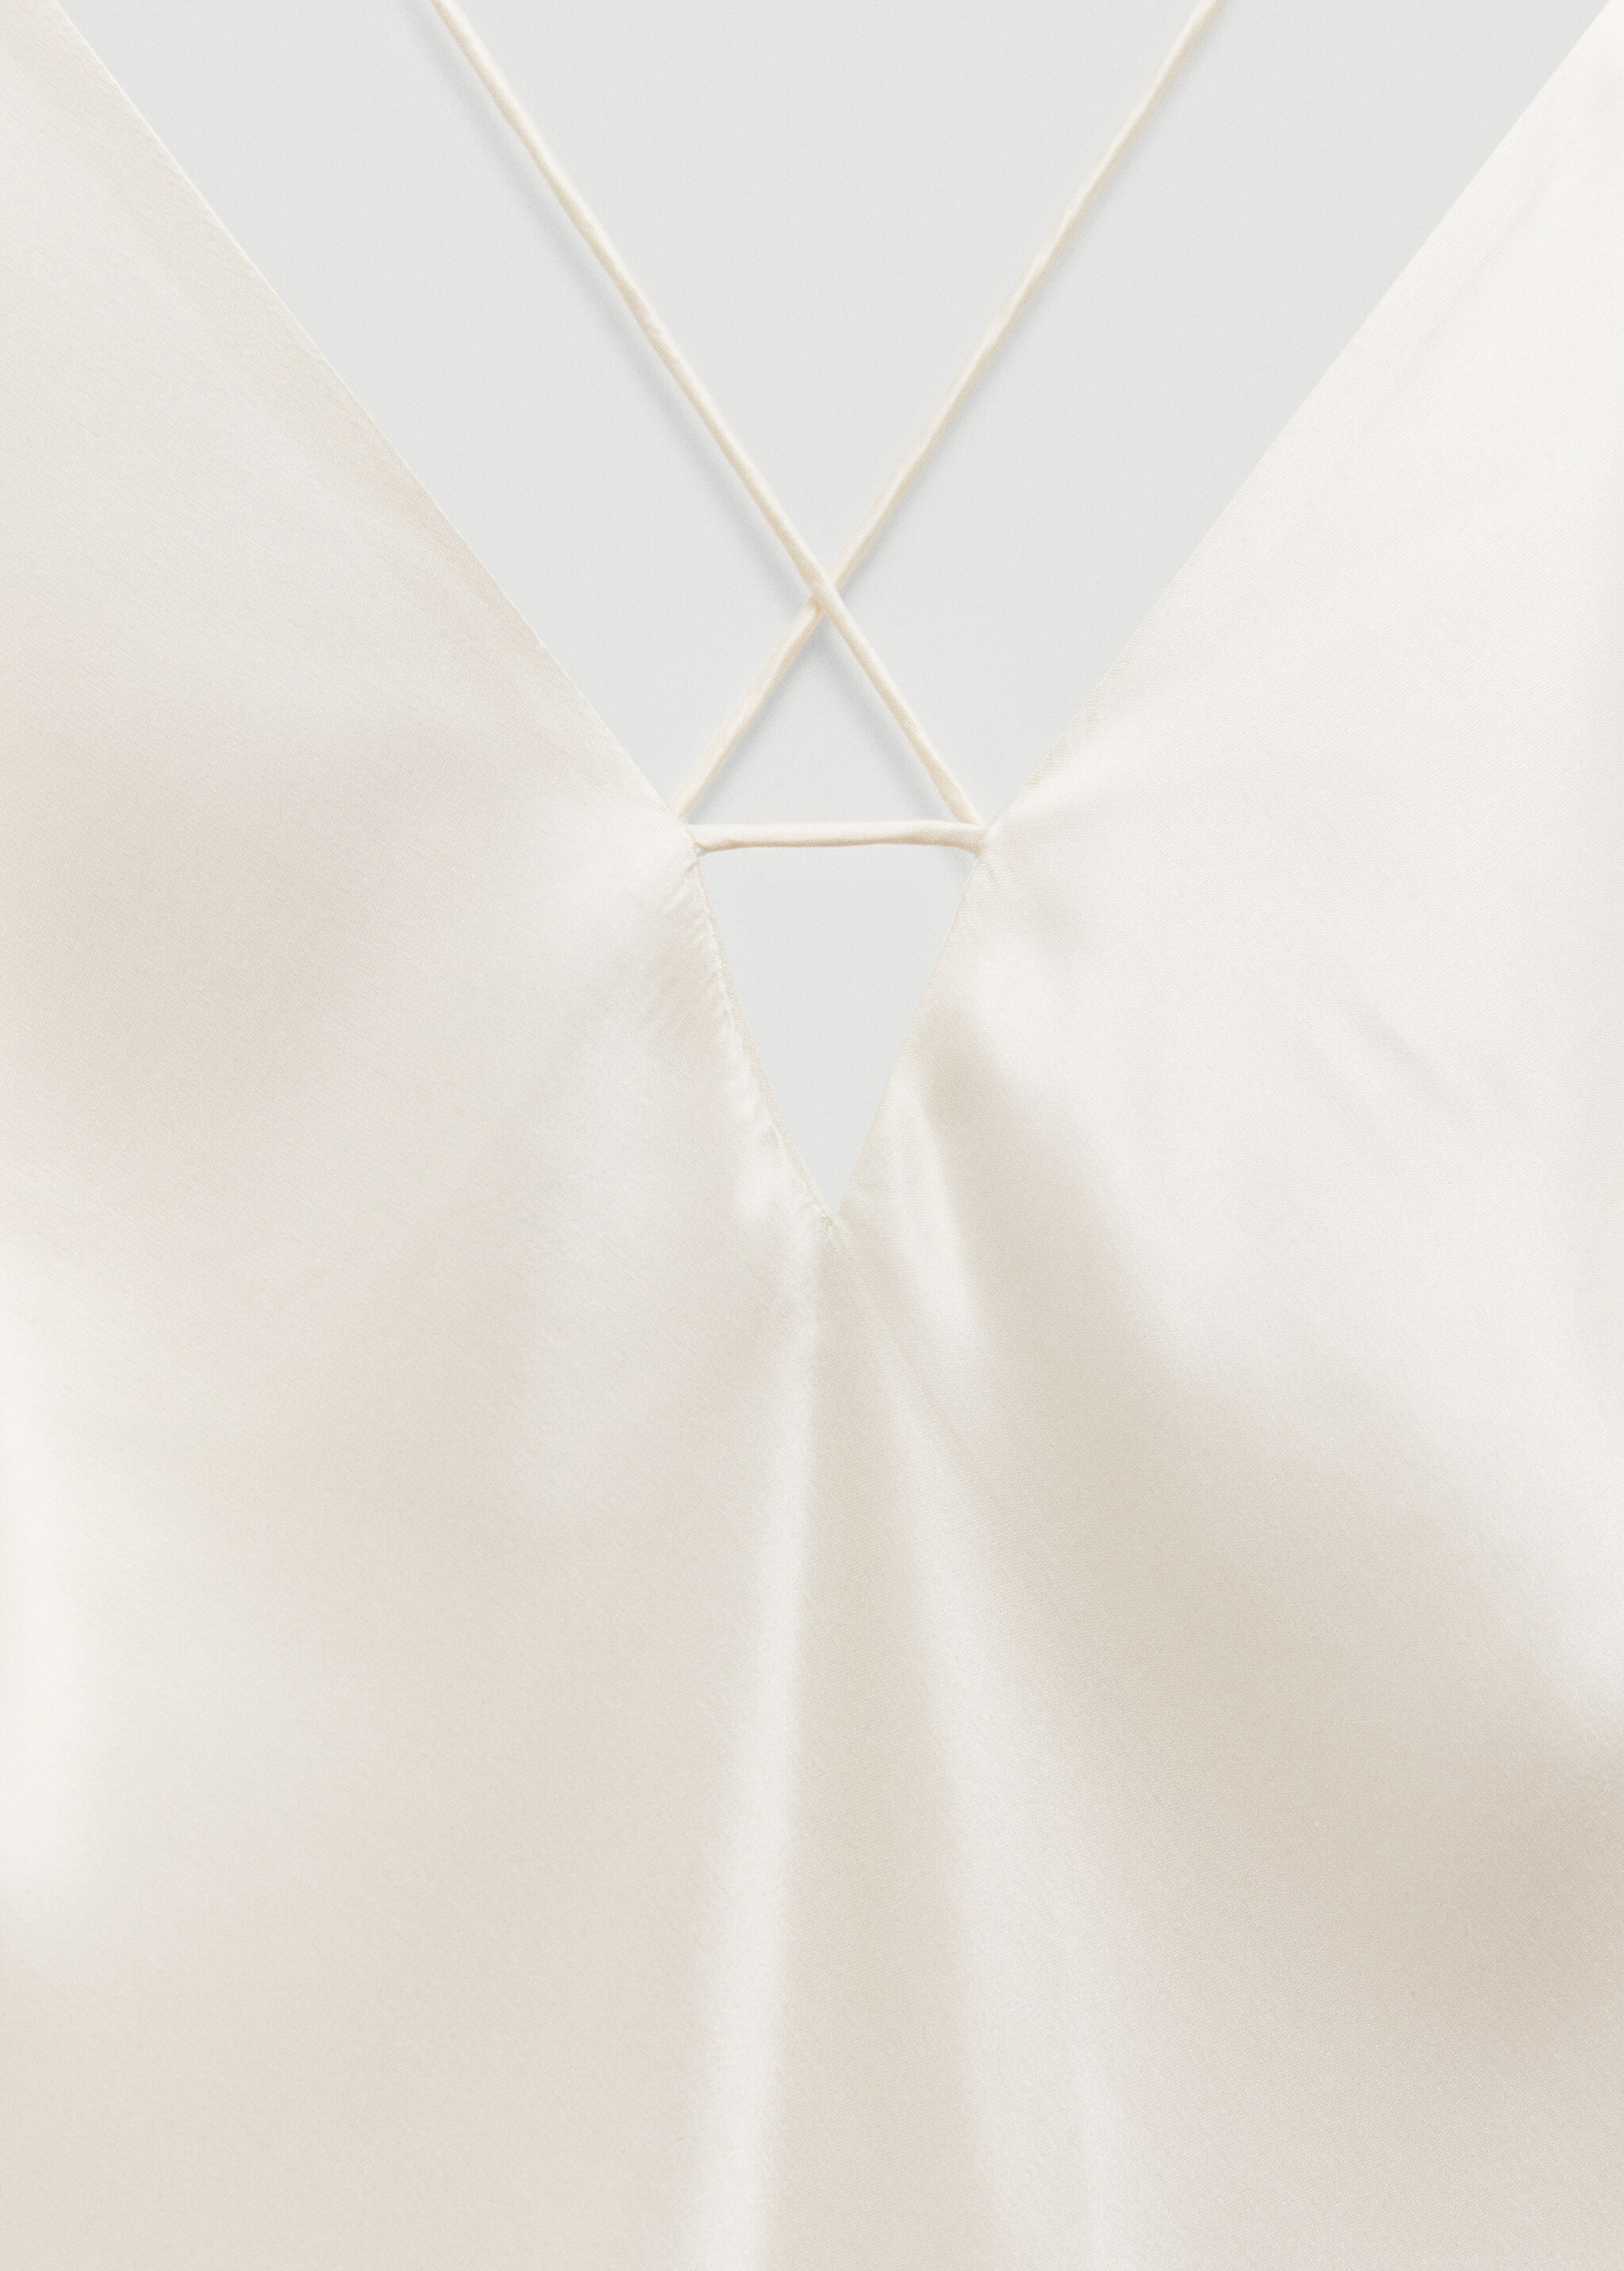 Silk lingerie dress - Details of the article 8